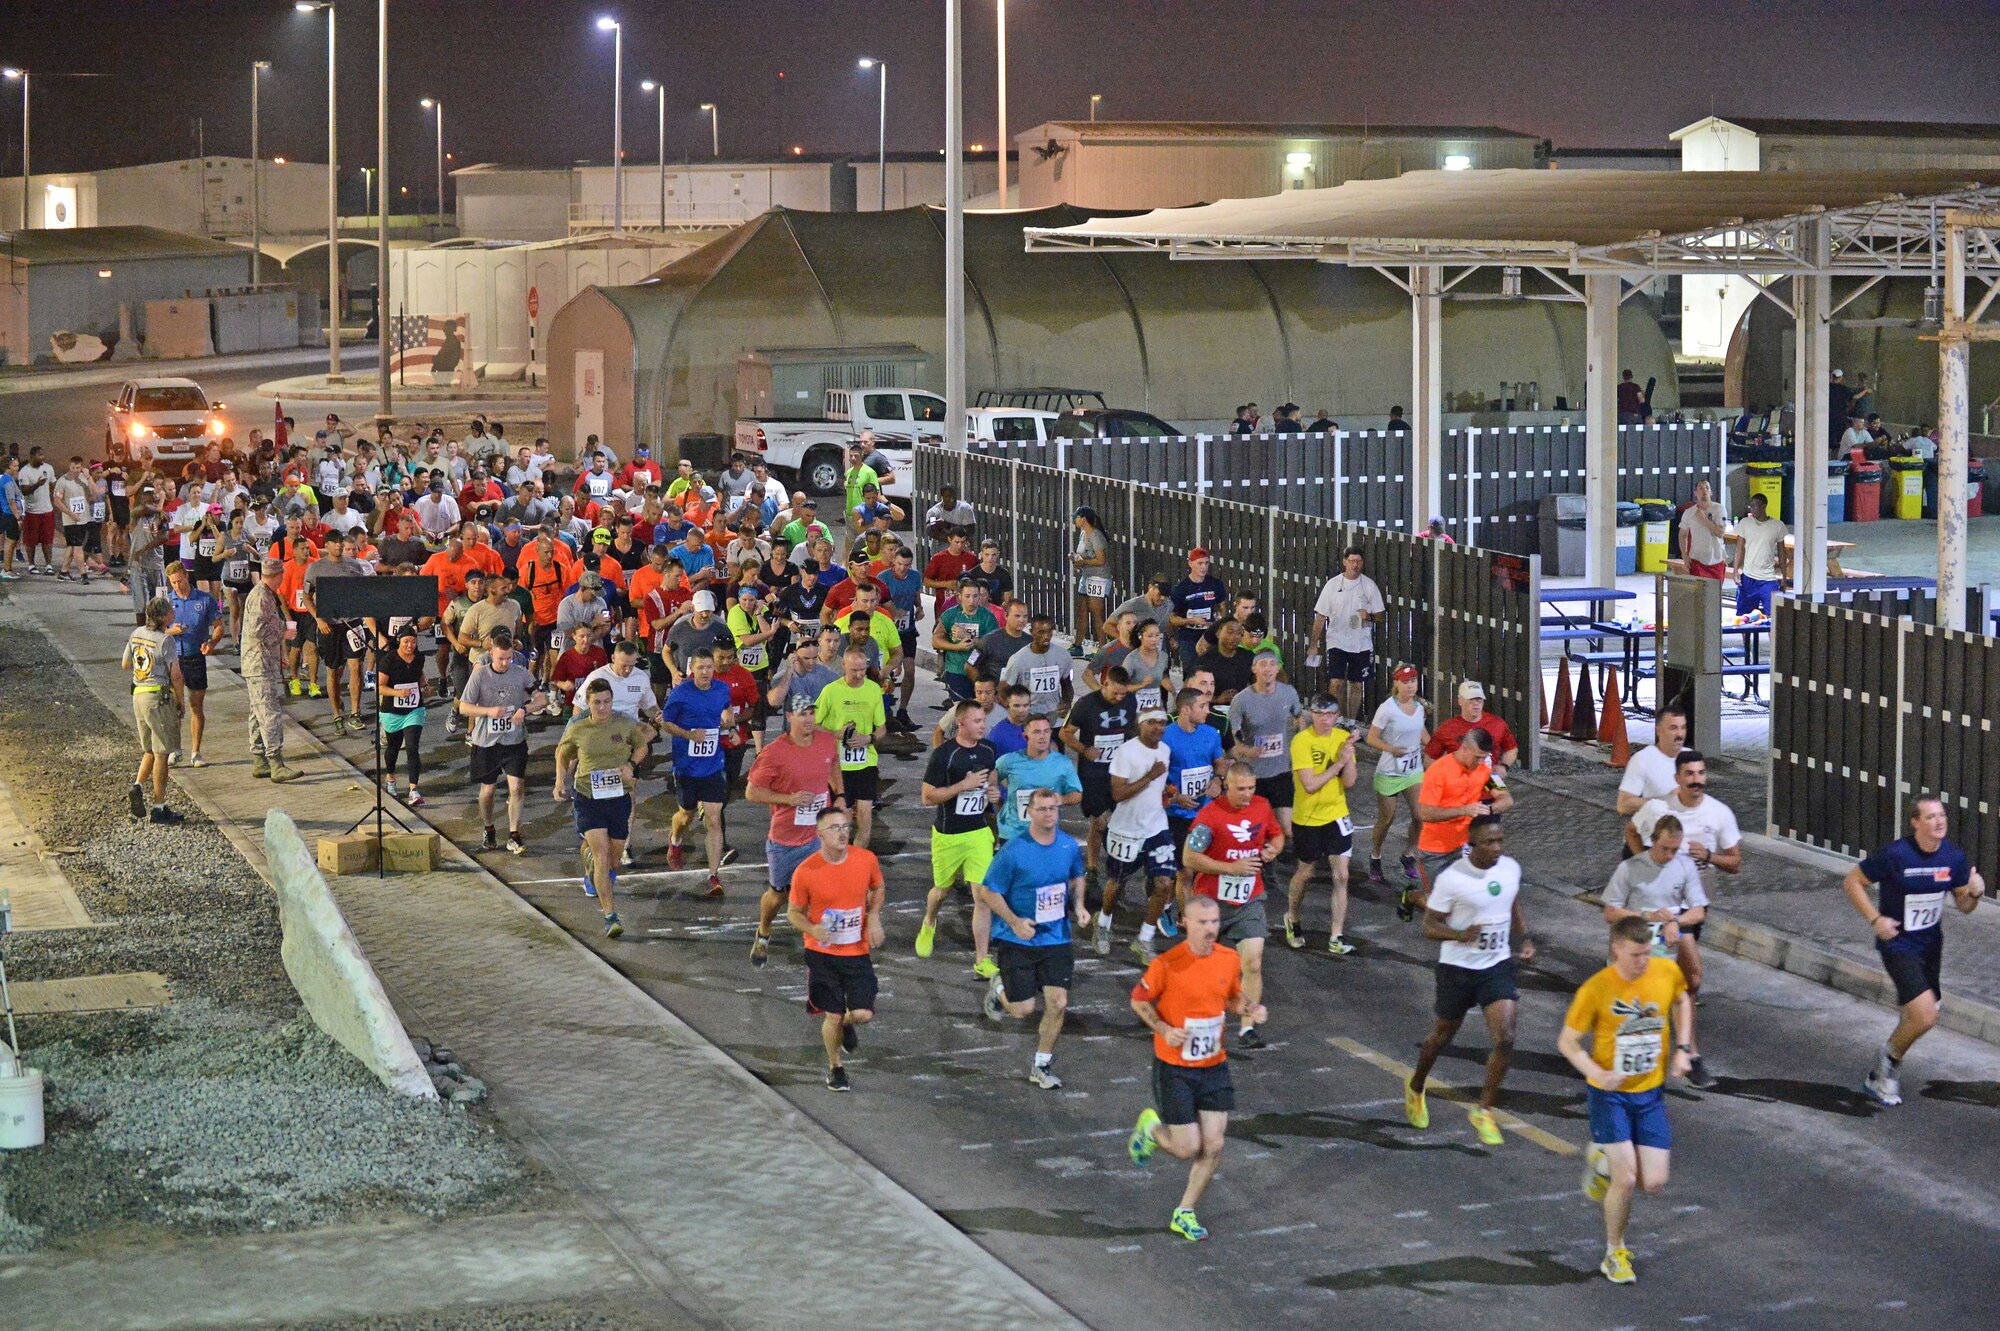 Runners begin the Air Force half marathon at an undisclosed location in Southwest Asia Sept. 19, 2015. The run was held in light of the Air Force’s 68th birthday. (U.S. Air Force photo/Tech. Sgt. Jeff Andrejcik)